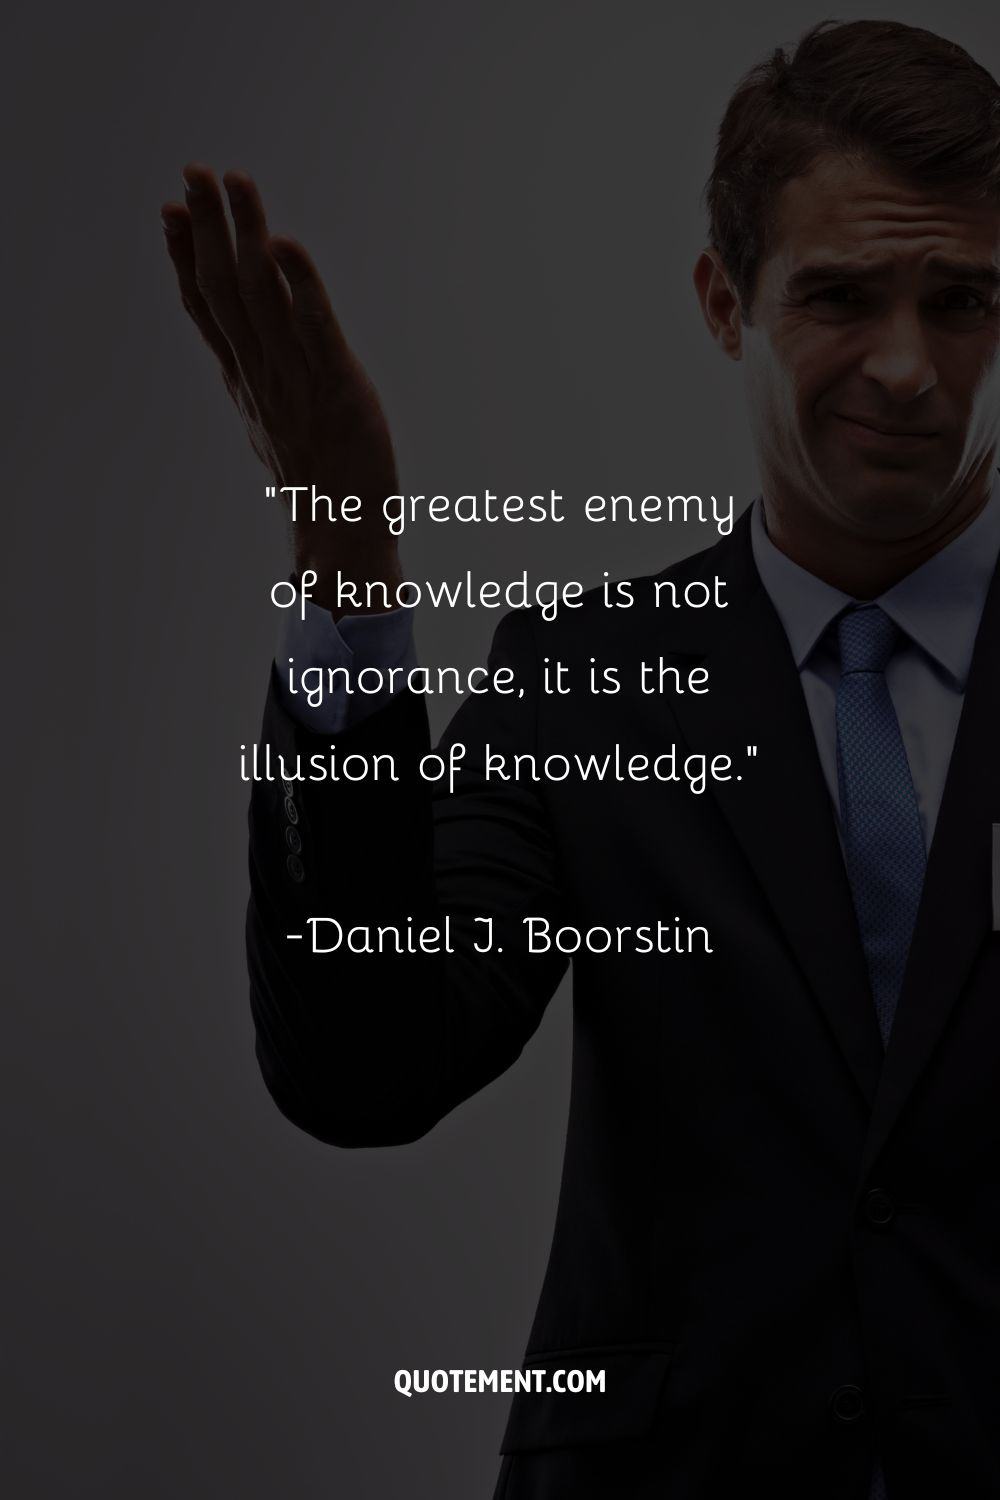 “The greatest enemy of knowledge is not ignorance, it is the illusion of knowledge.”